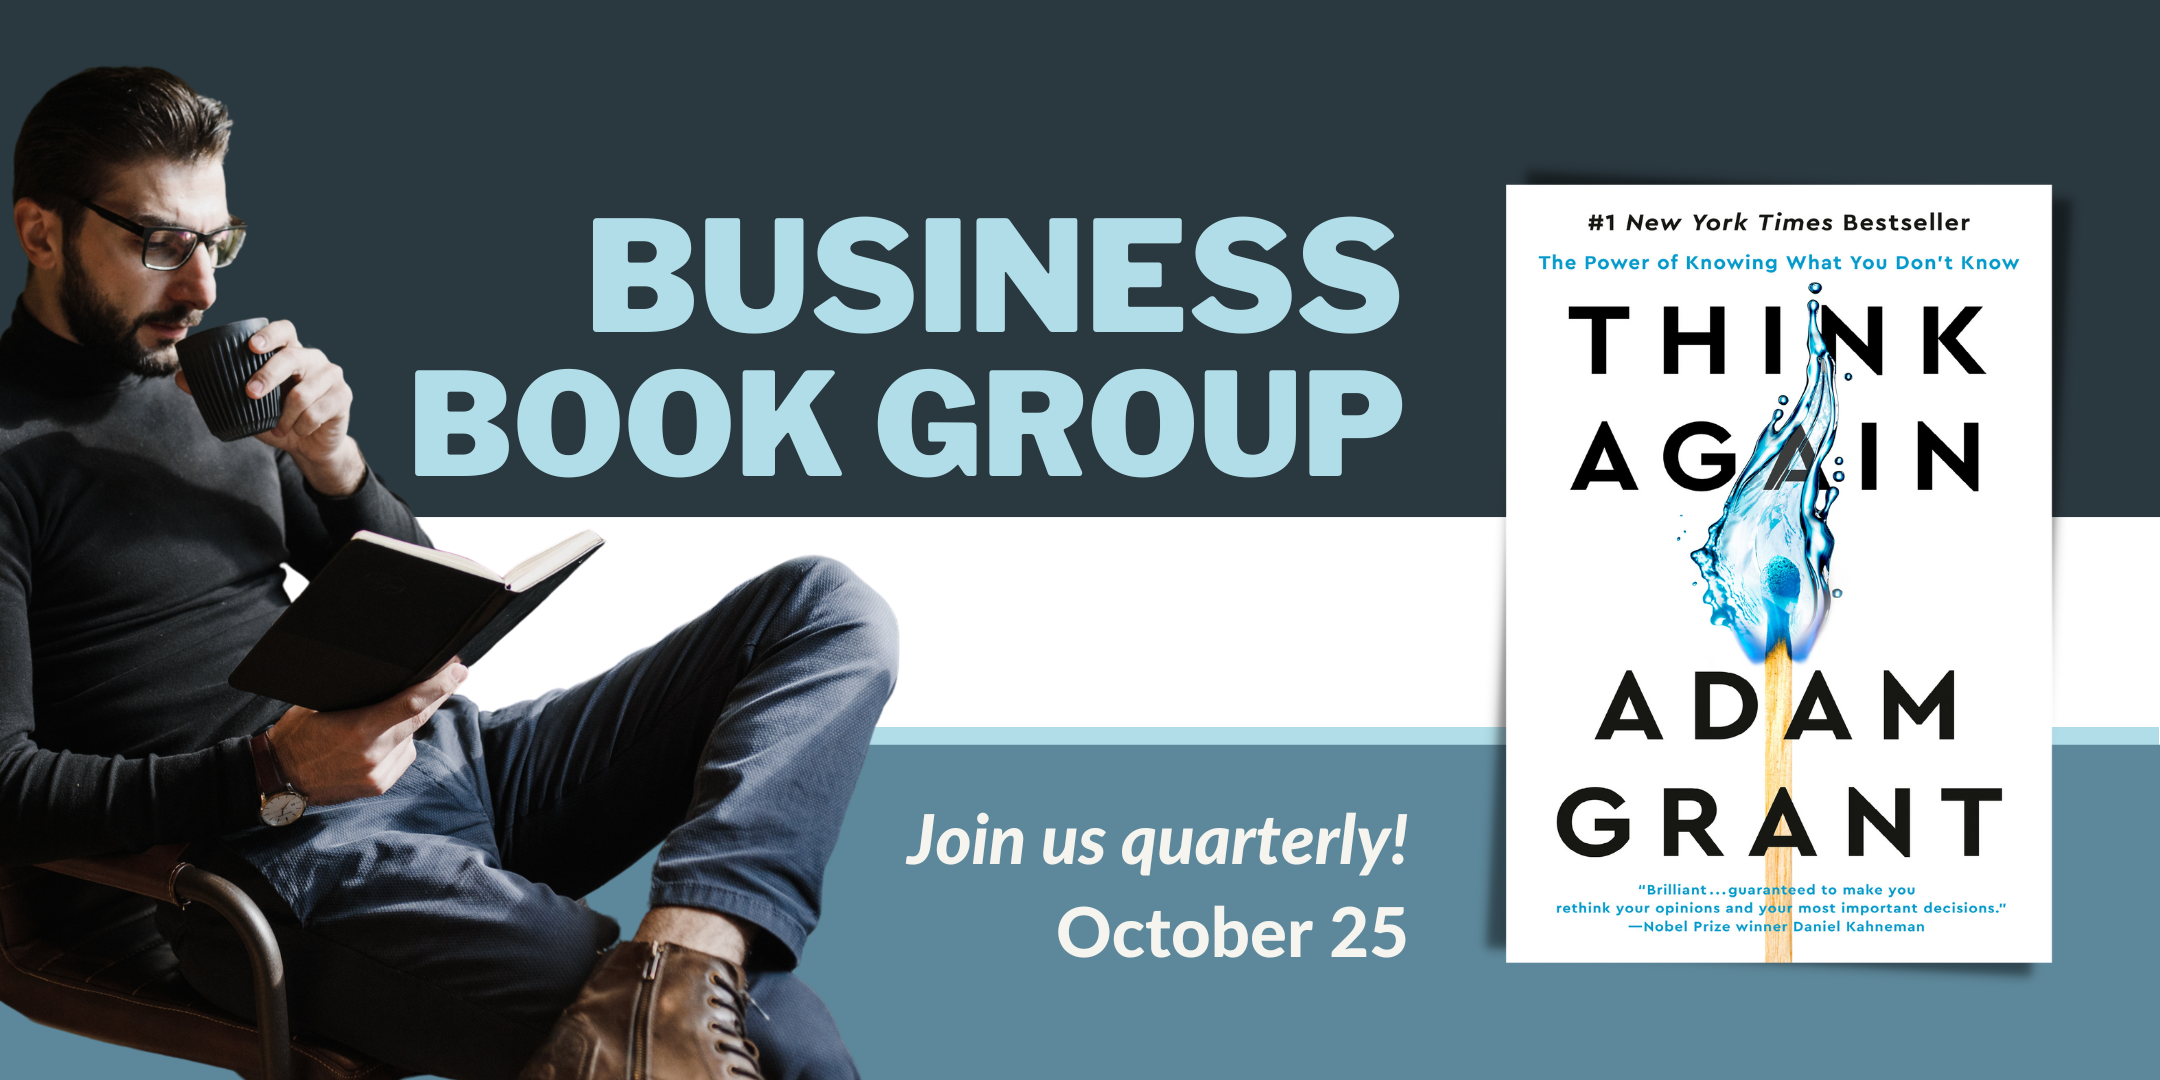 image of "Business Book Group: Think Again"